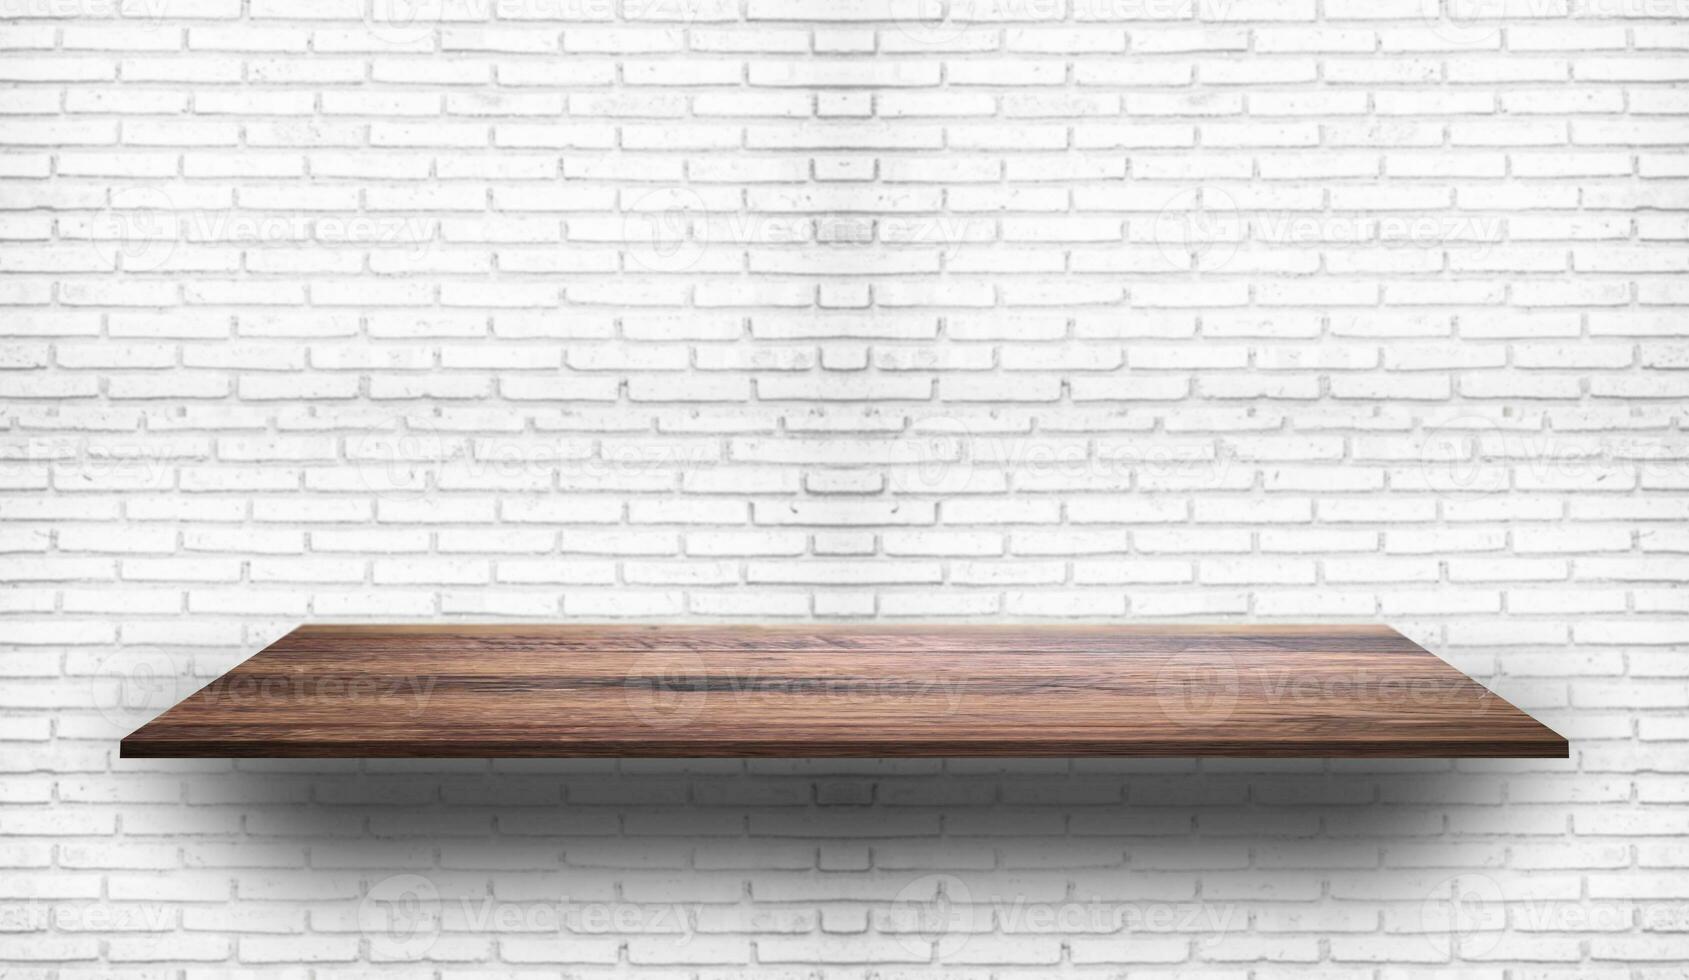 Empty wood plank shelf at white brick wall pattern background. Design for product display, mockup, advertise, banner, or montage photo